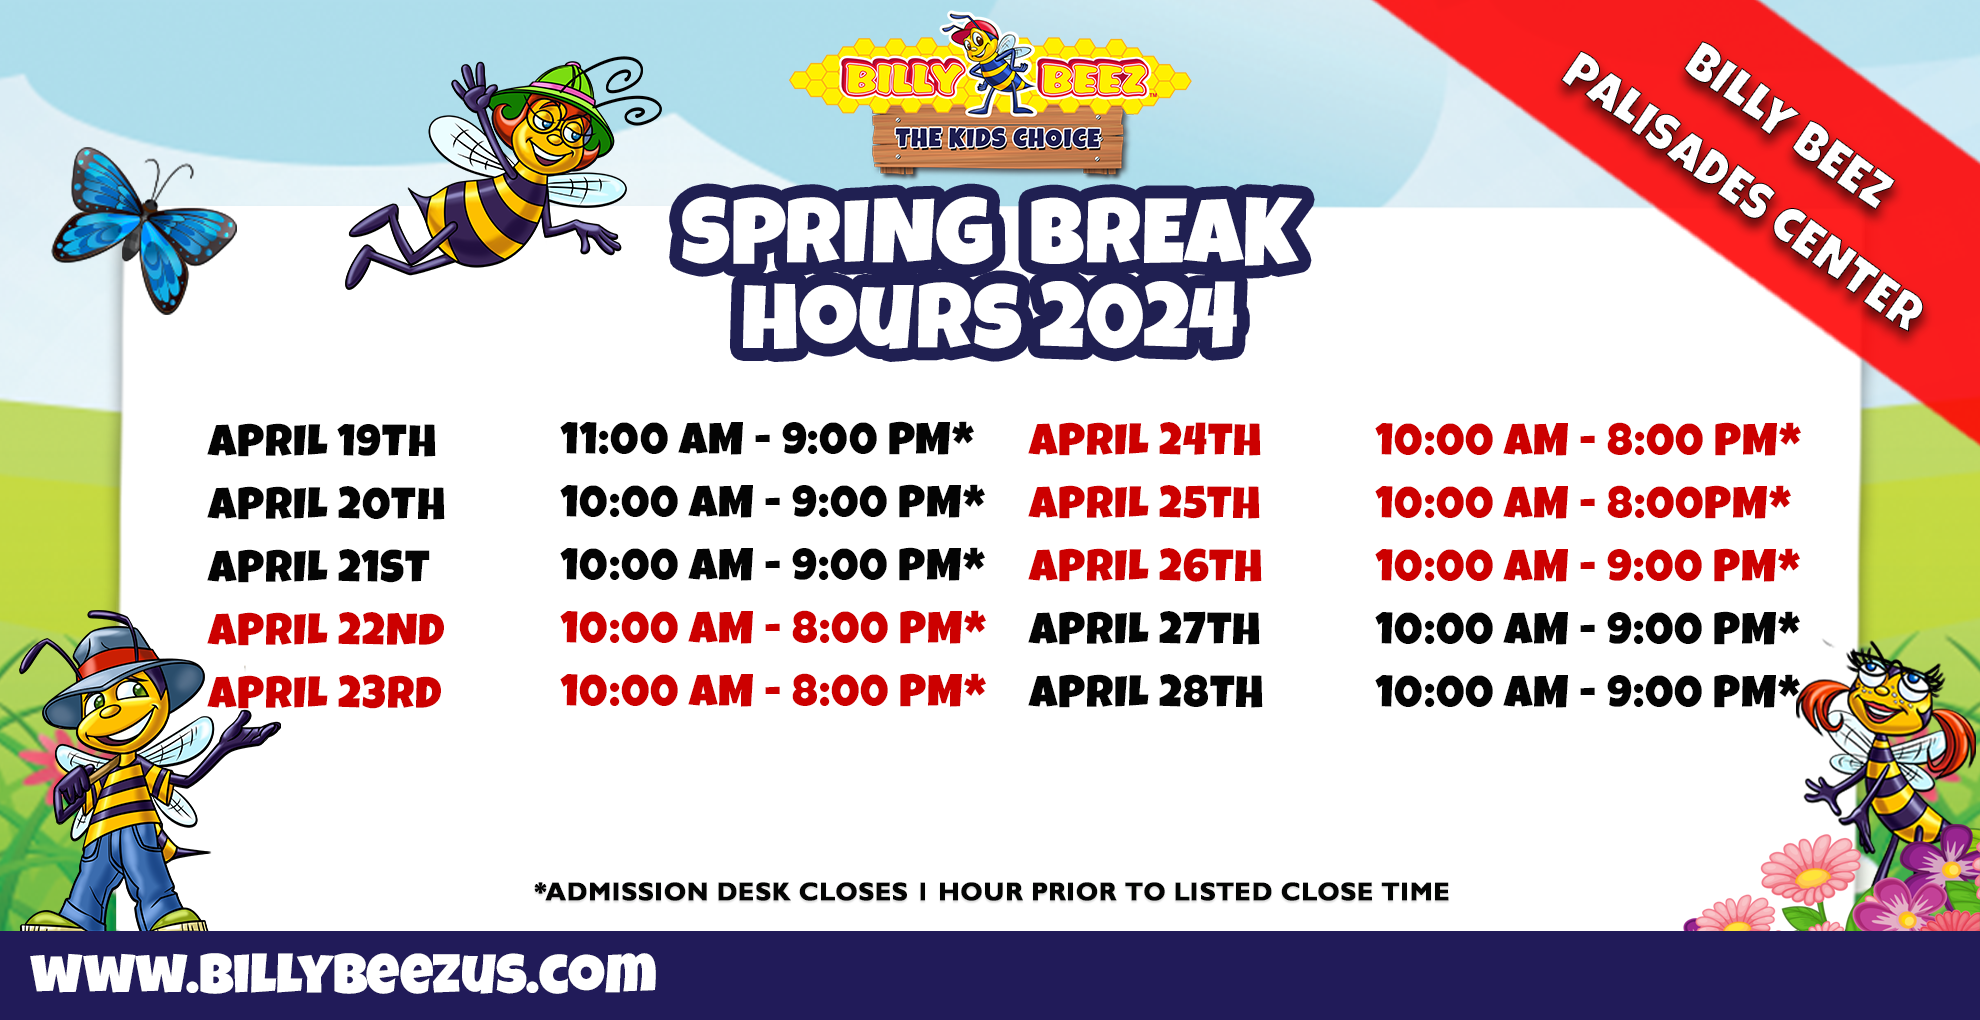 Billy Beez The Kids Place Billy Beez Palisades Center Spring Break Hours 2024 April 19th 11:00am-9:00am* April 20th 10:00am-9:00pm* April 21st 10:00am-9:00pm* April 22nd 10:00am-8:00pm* April 23rd 10:00am-8:00pm* April 24th 10:00am-8:00pm* April 25th 10:00am-8:00pm* April 26th 10:00am-9:00pm* April 27th 10:00am-9:00pm* April 28th 10:00am-9:00pm* *Admission desk closes 1 hour prior to listed close time